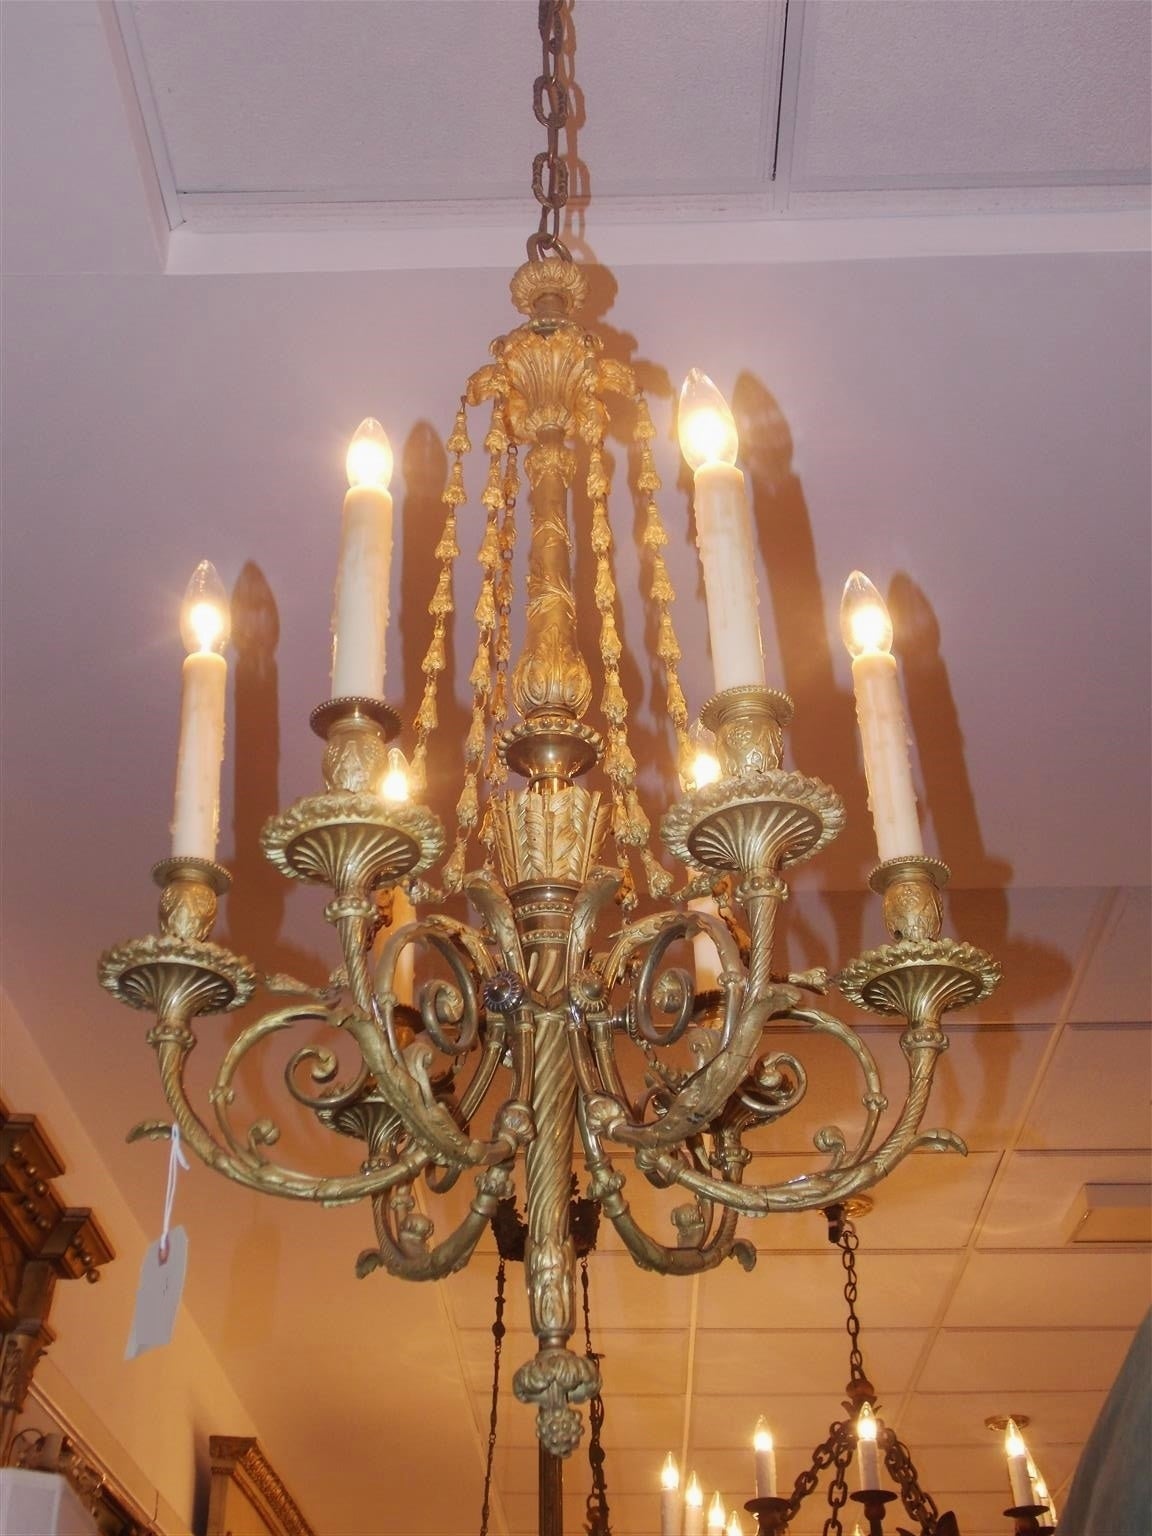 French gilt bronze six-light chandelier with decorative floral canopy, cascading bellflowers, scrolled acanthus floral arms, and centered column with an arrow and sheath motif. Early 19th century. Originally candle powered and has been electrified.